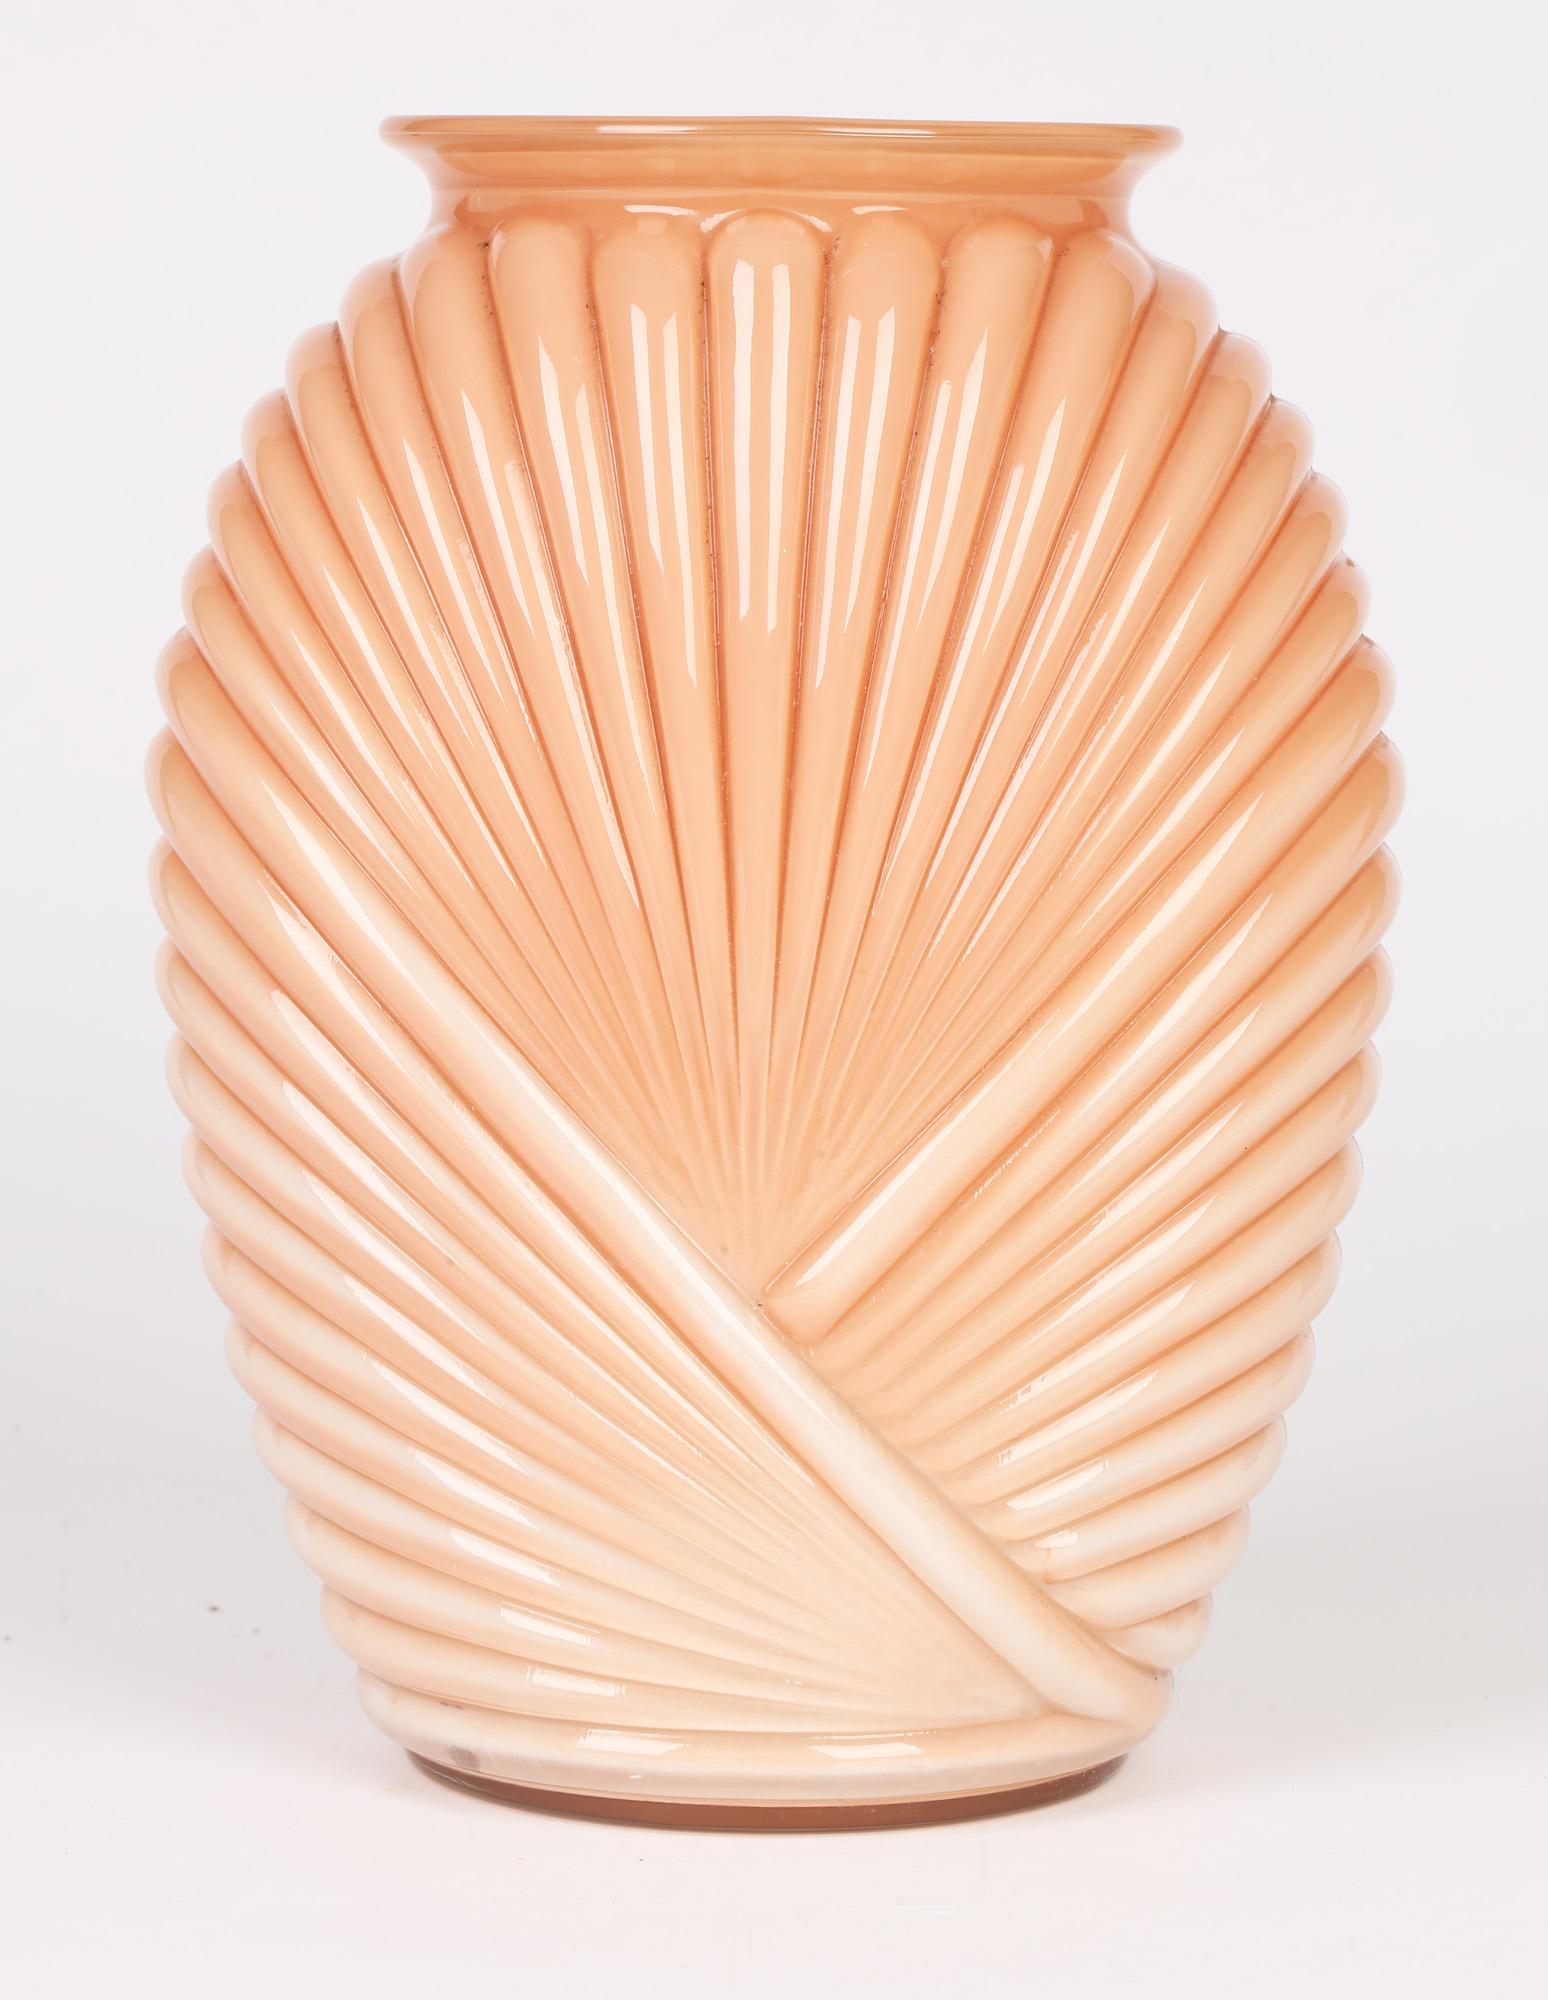 Anchor Hocking Art Deco Style Salmon Pink Molded Fan Pattern Glass Vase For Sale 1